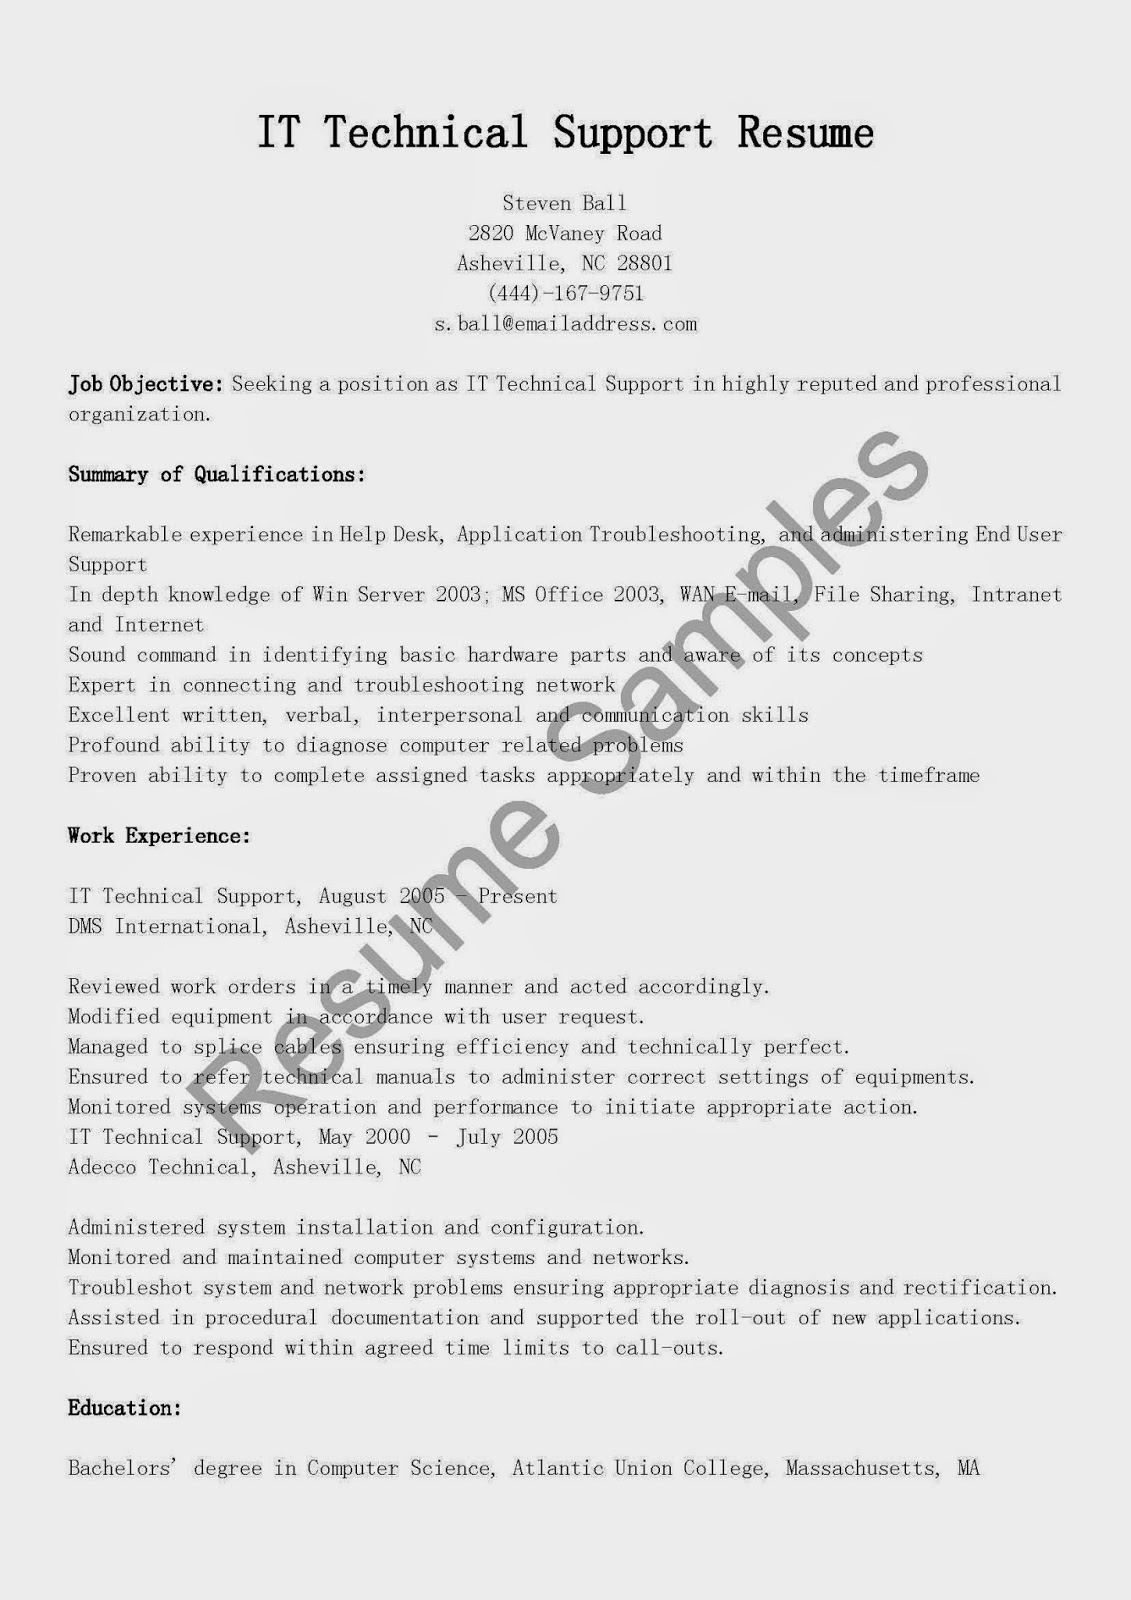 Application support resume